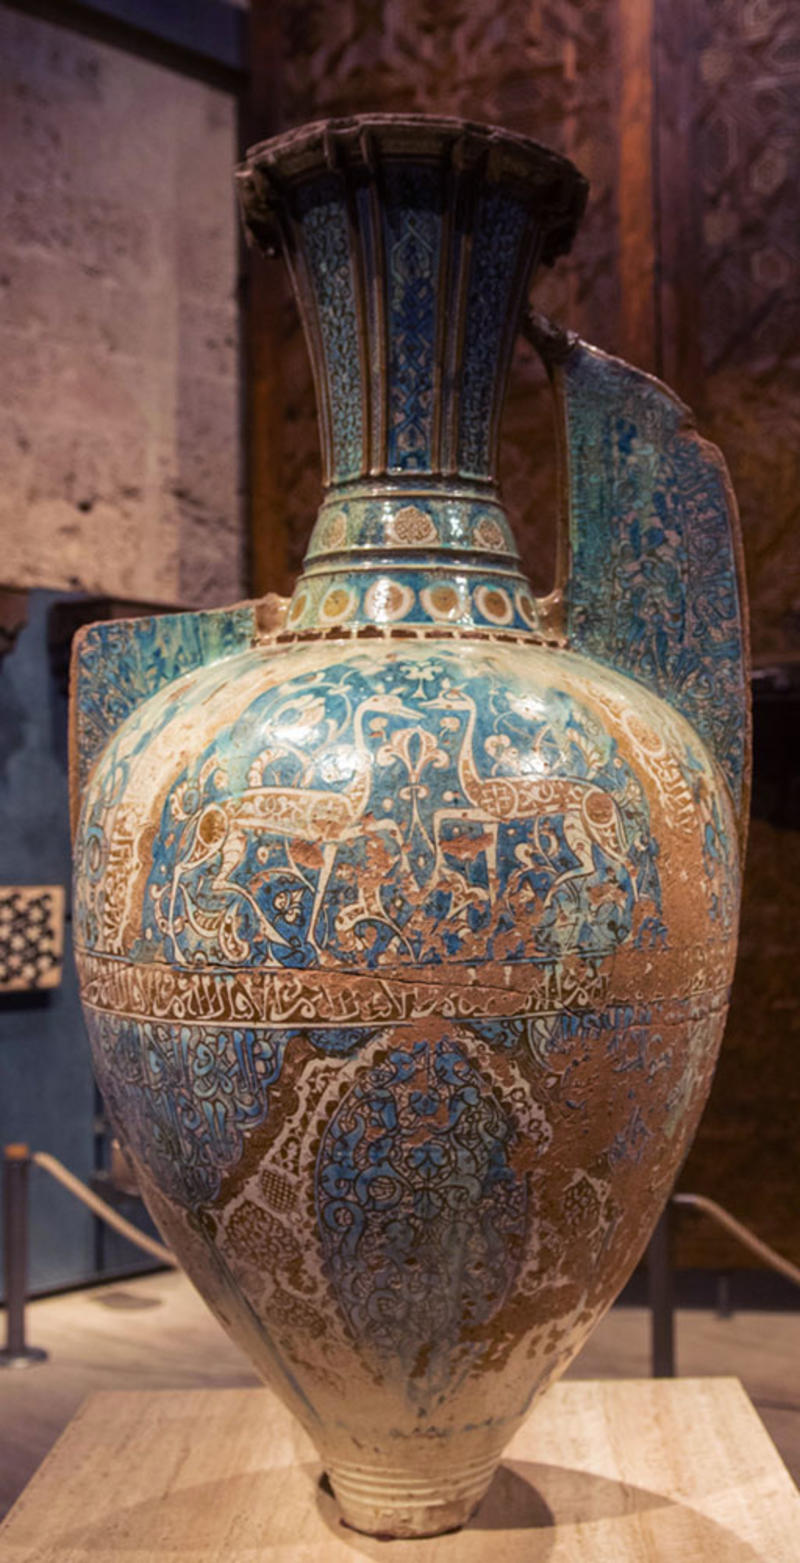 Alhambra Vase, Malaga,14th-15th century, earthenware with blue glaze and lustre decoration